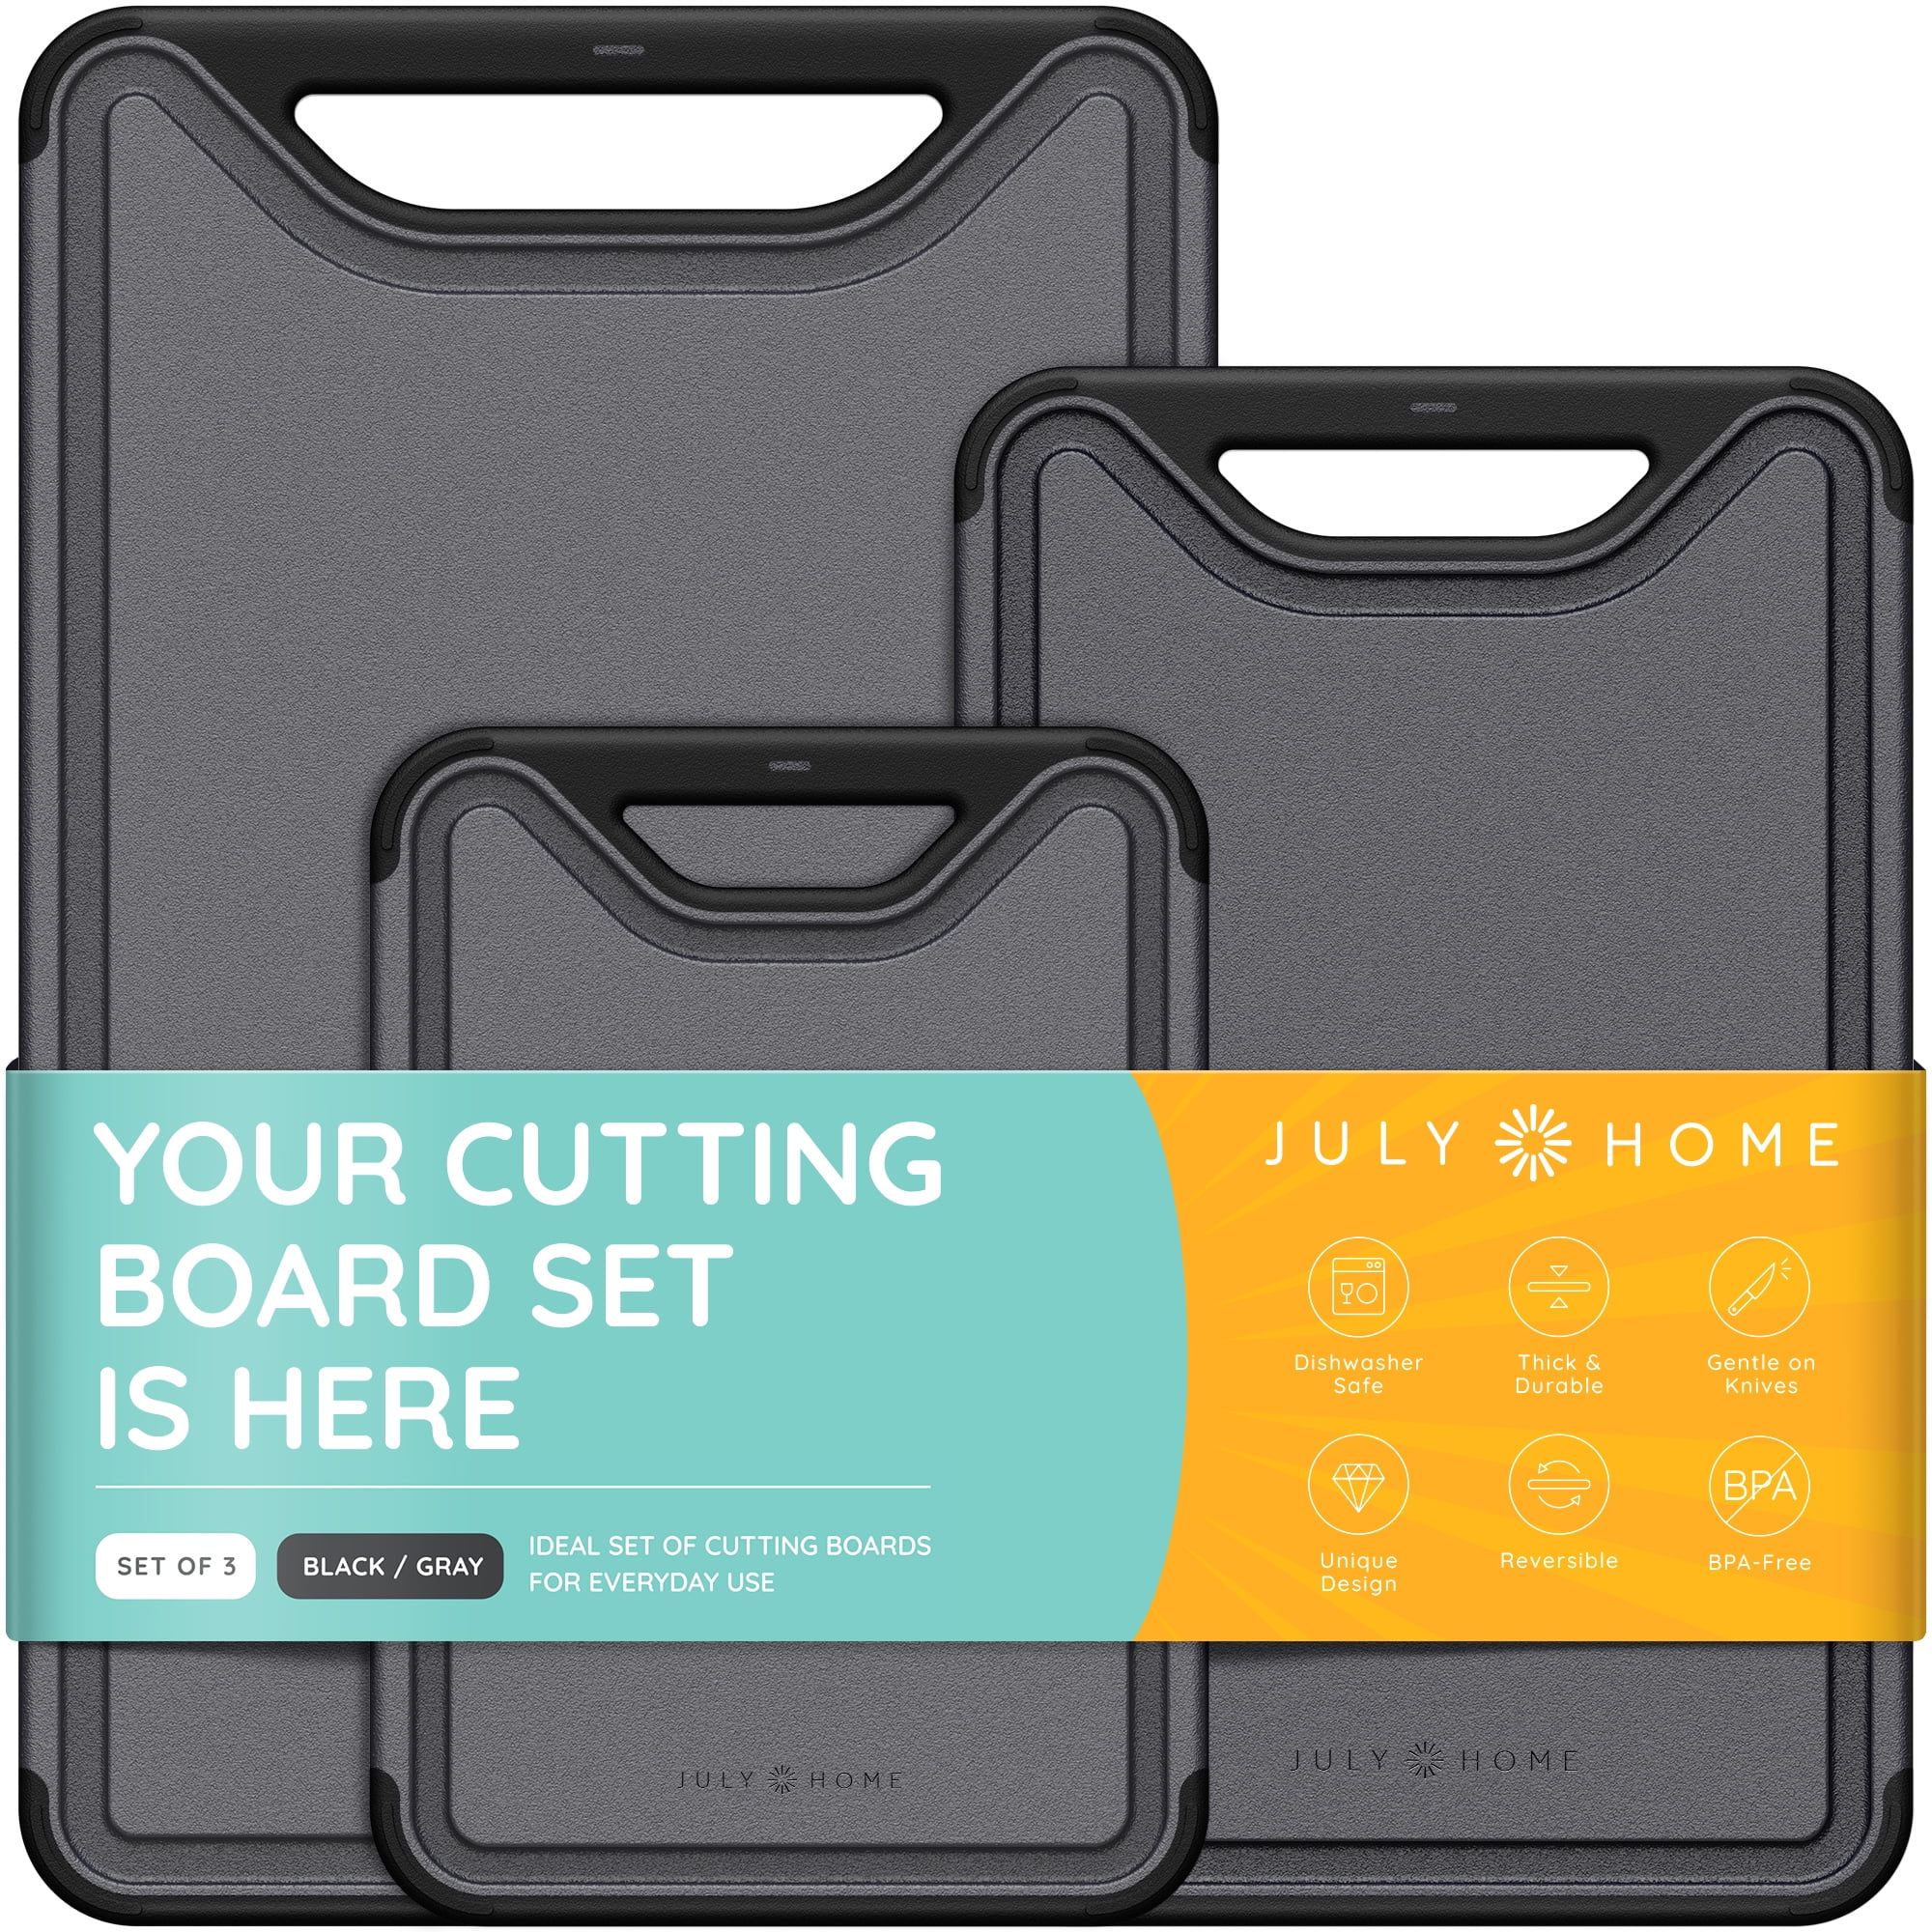 Chop Above Antibacterial Plastic Cutting Board Dishwasher Safe. WORK SMART  NOT HARD Patented First of its Kinde.